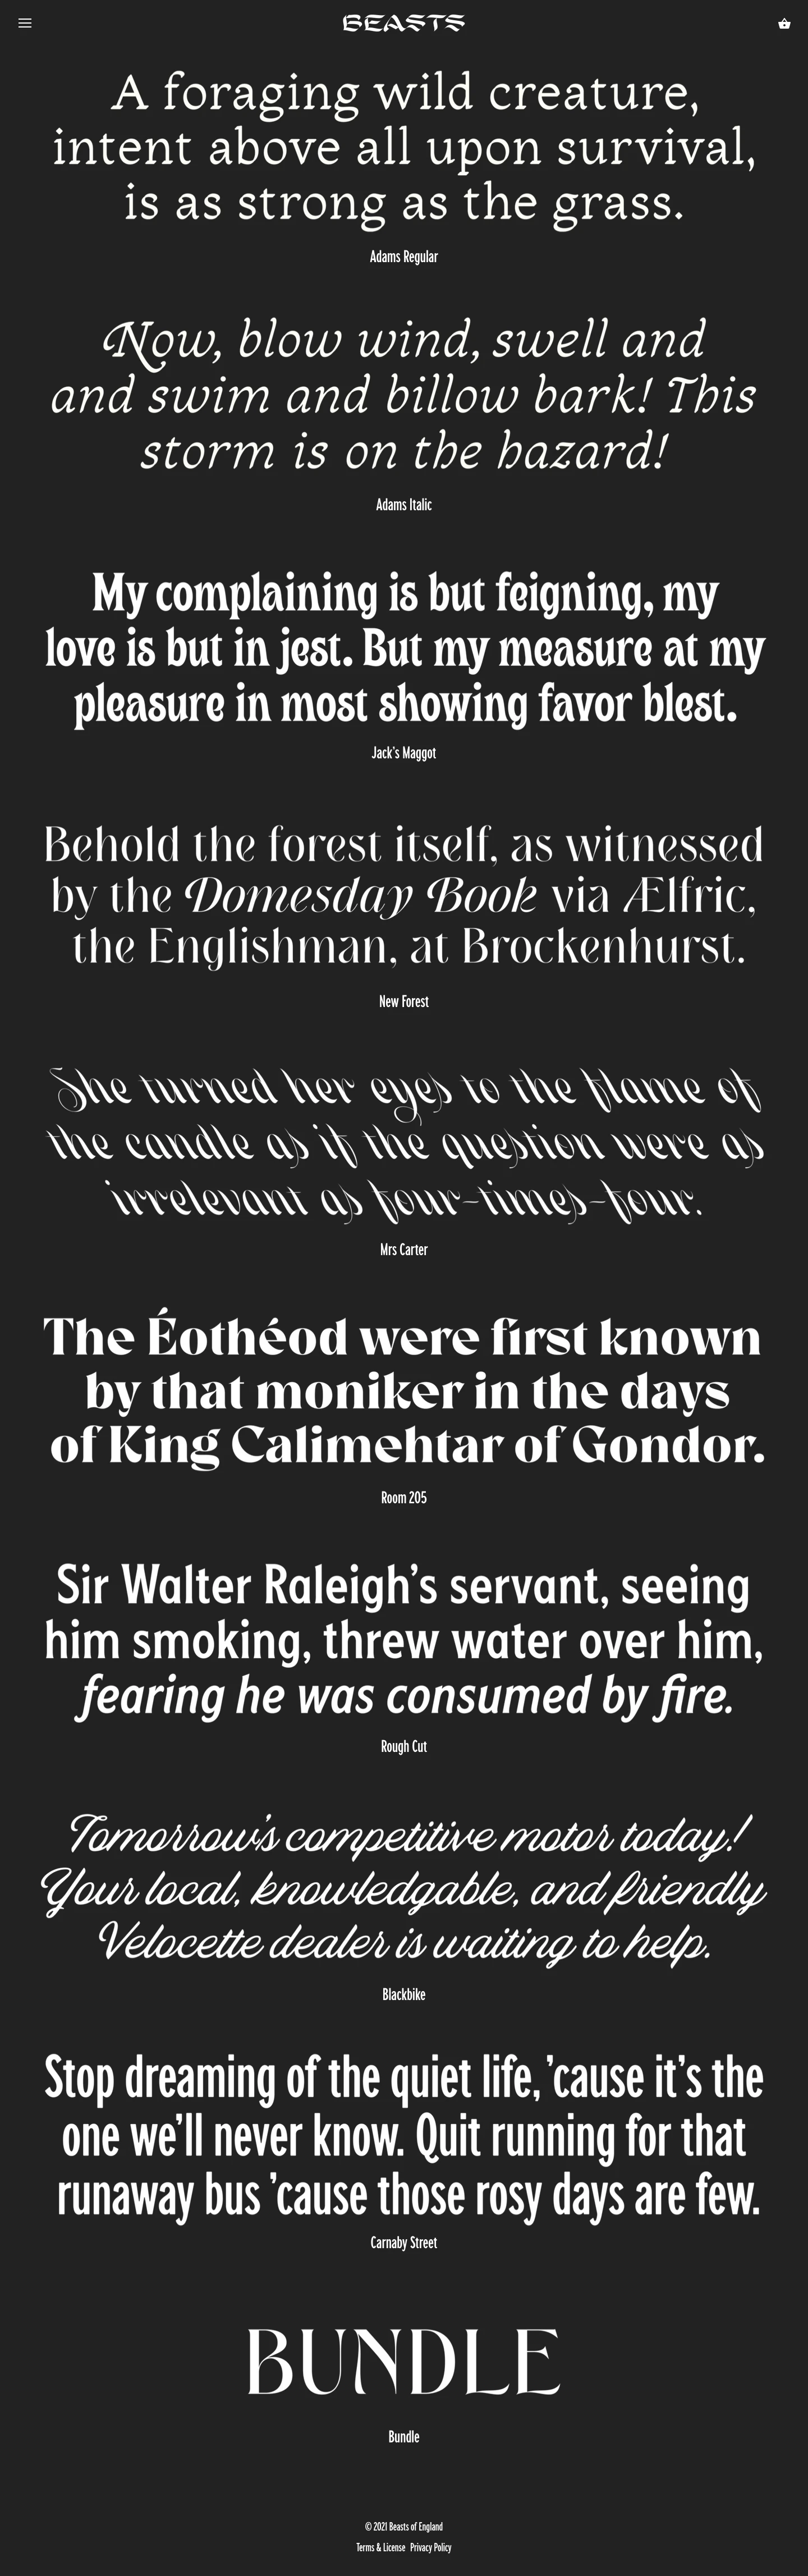 Beasts of England Landing Page Example: Stories need fonts.